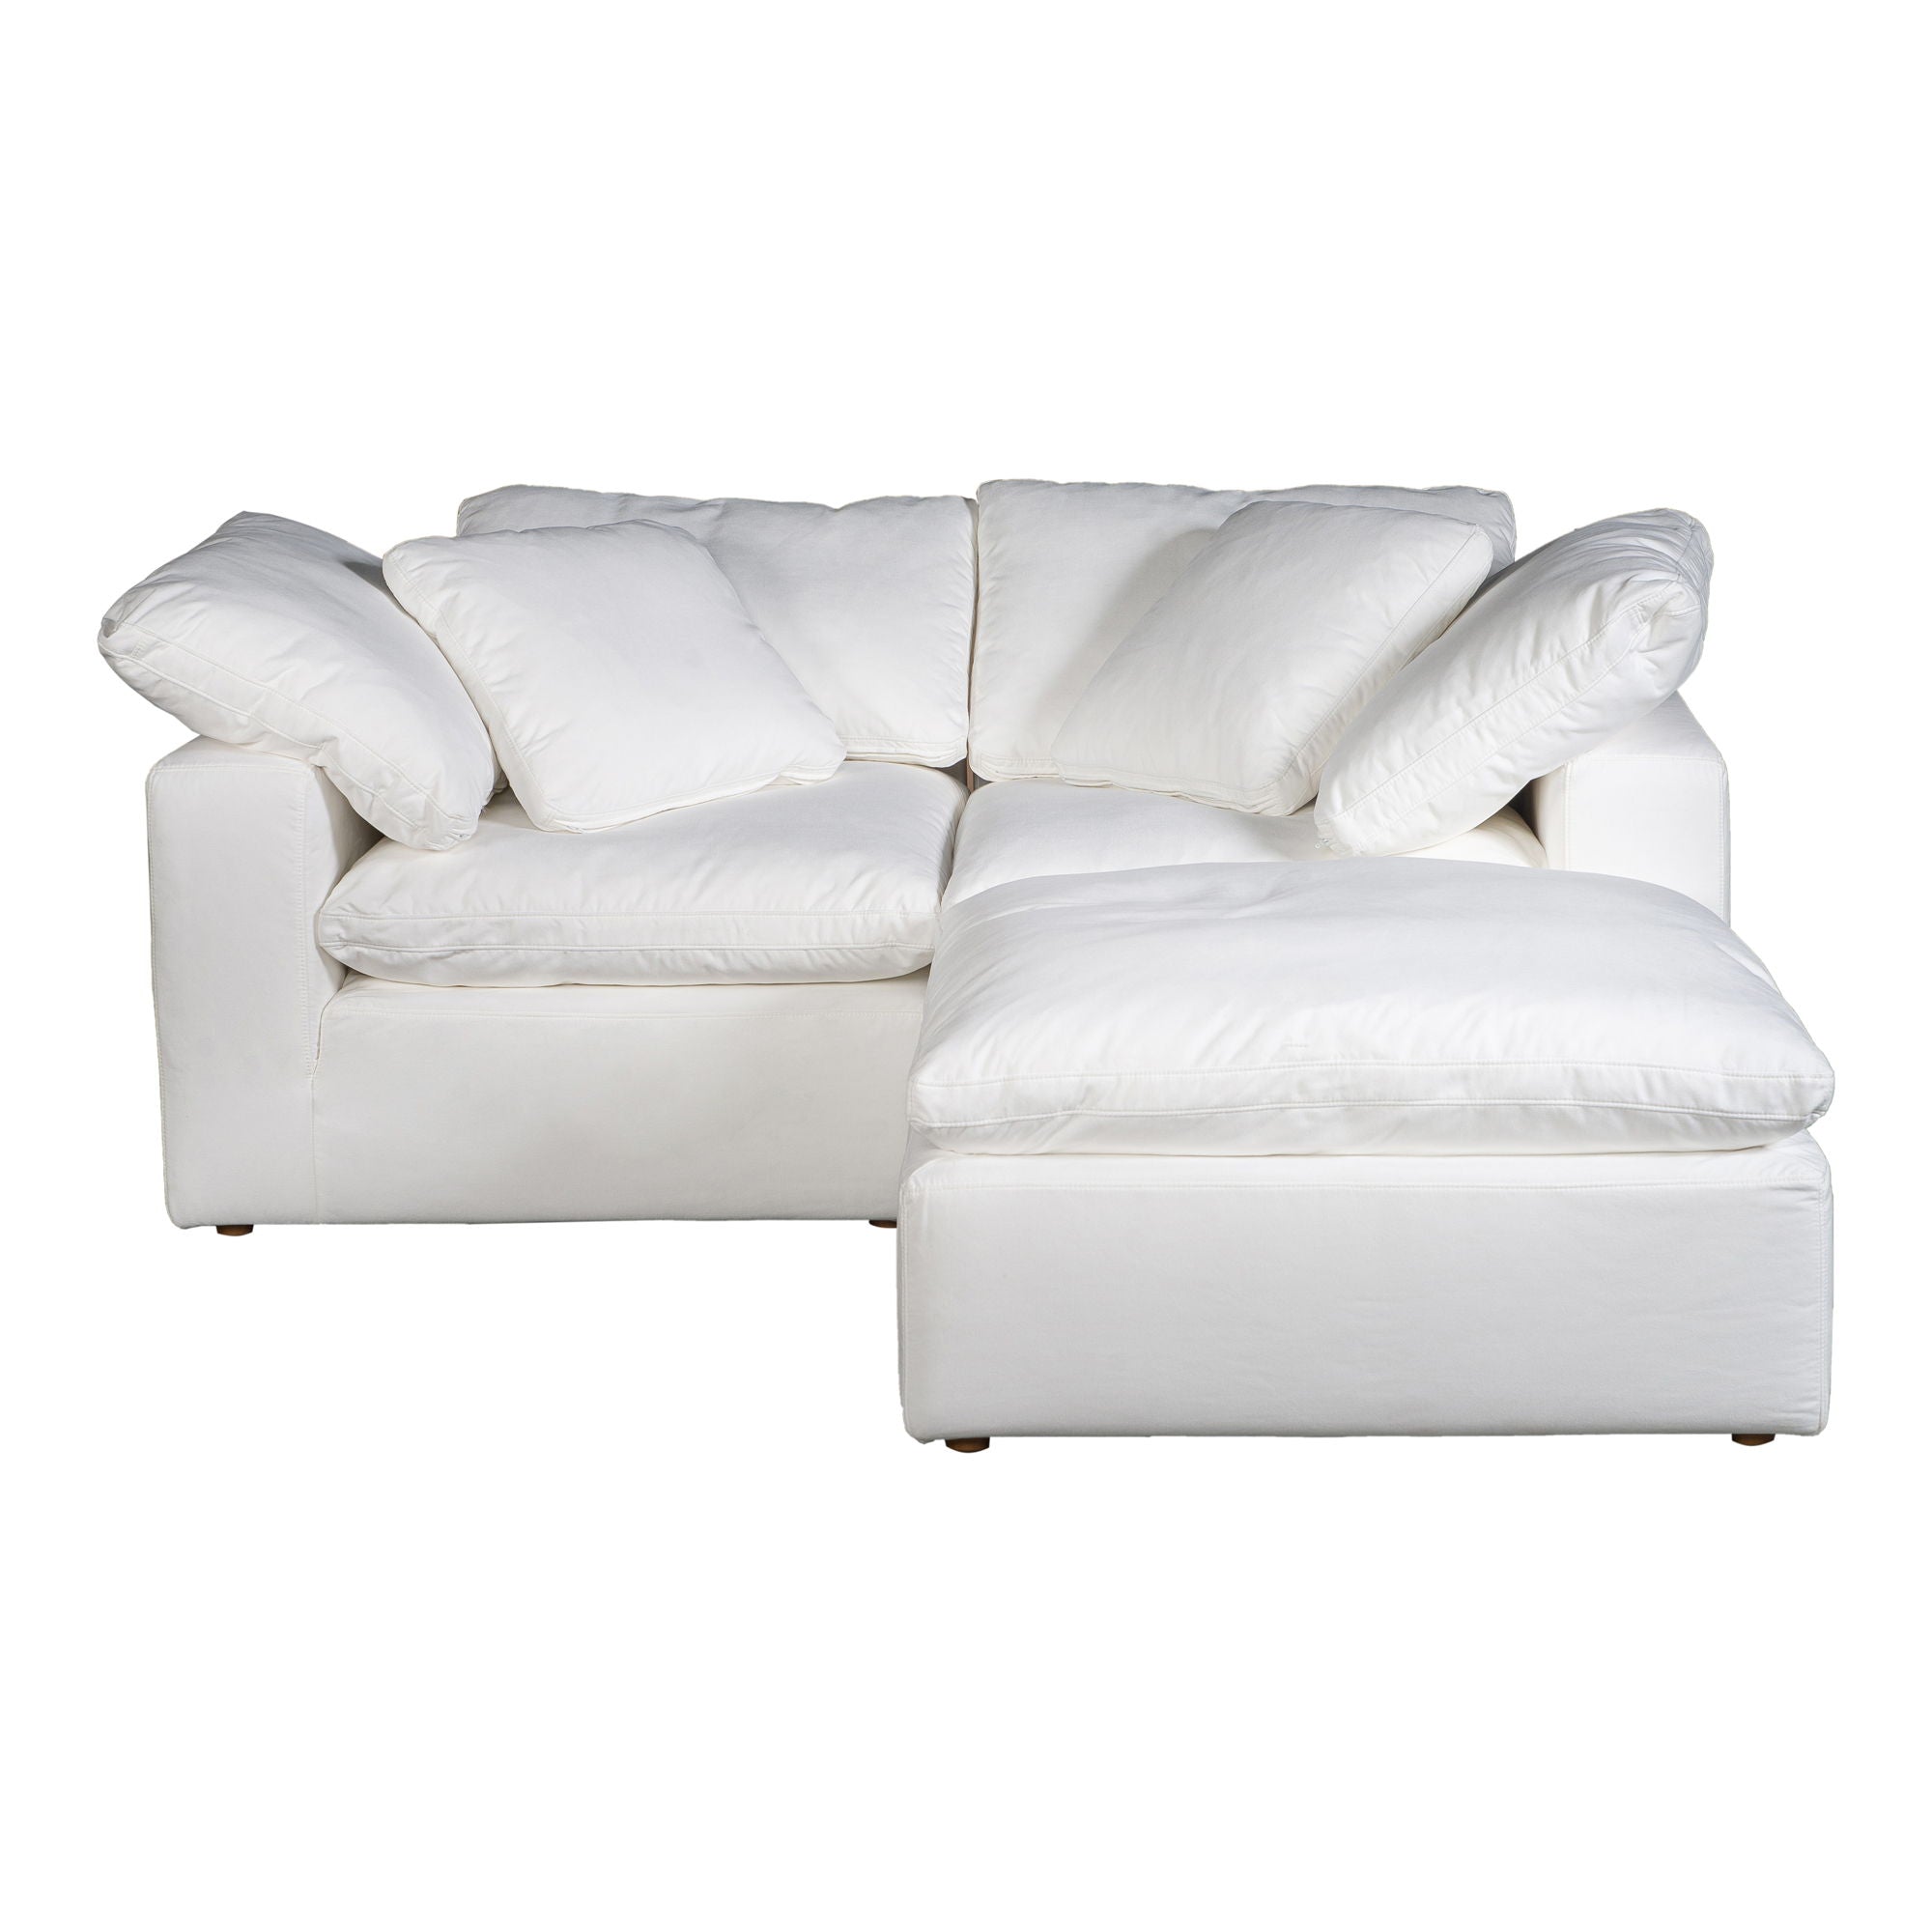 Terra Condo Modular Sectional Cream Livesmart Fabric-Stationary Sectionals-American Furniture Outlet